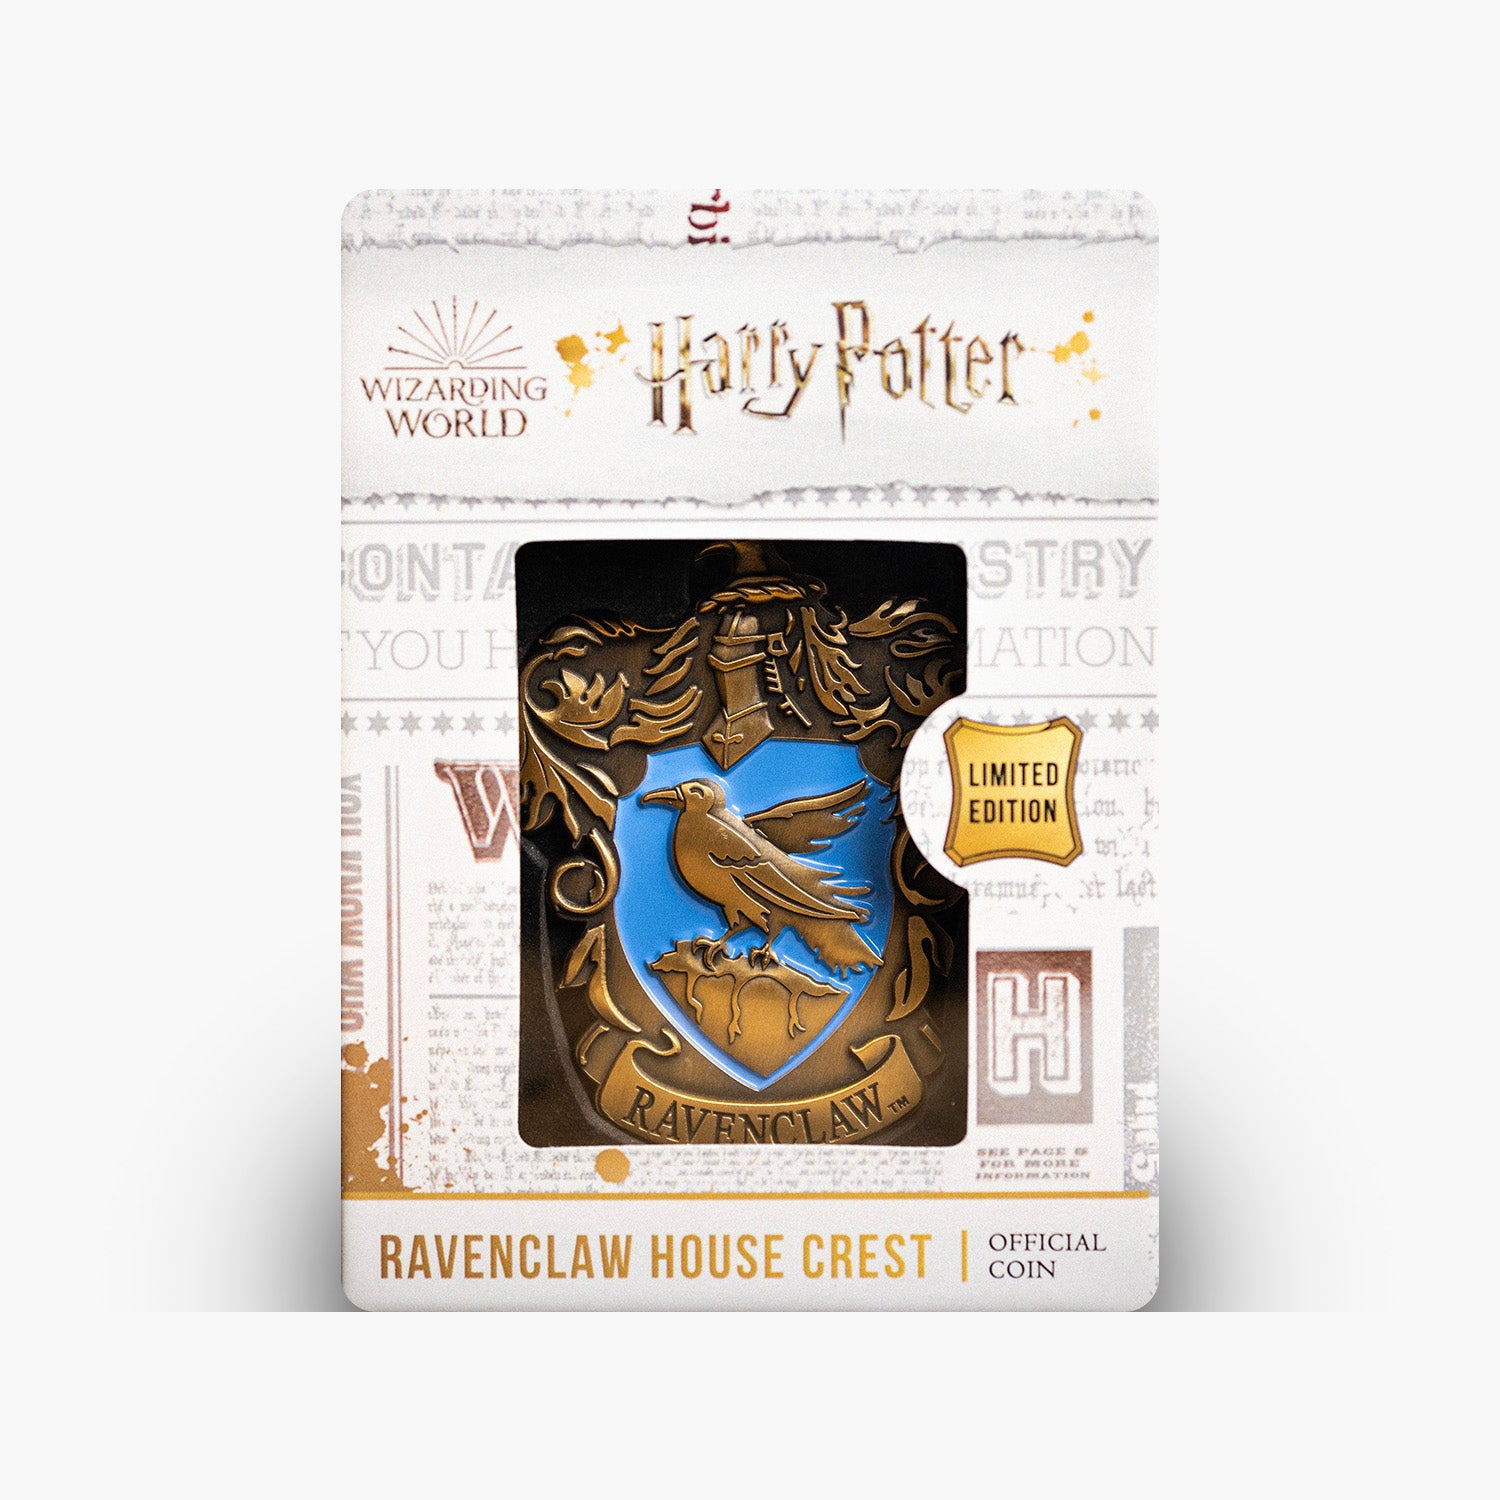 The Official Harry Potter Ravenclaw House Crest Shaped Coin